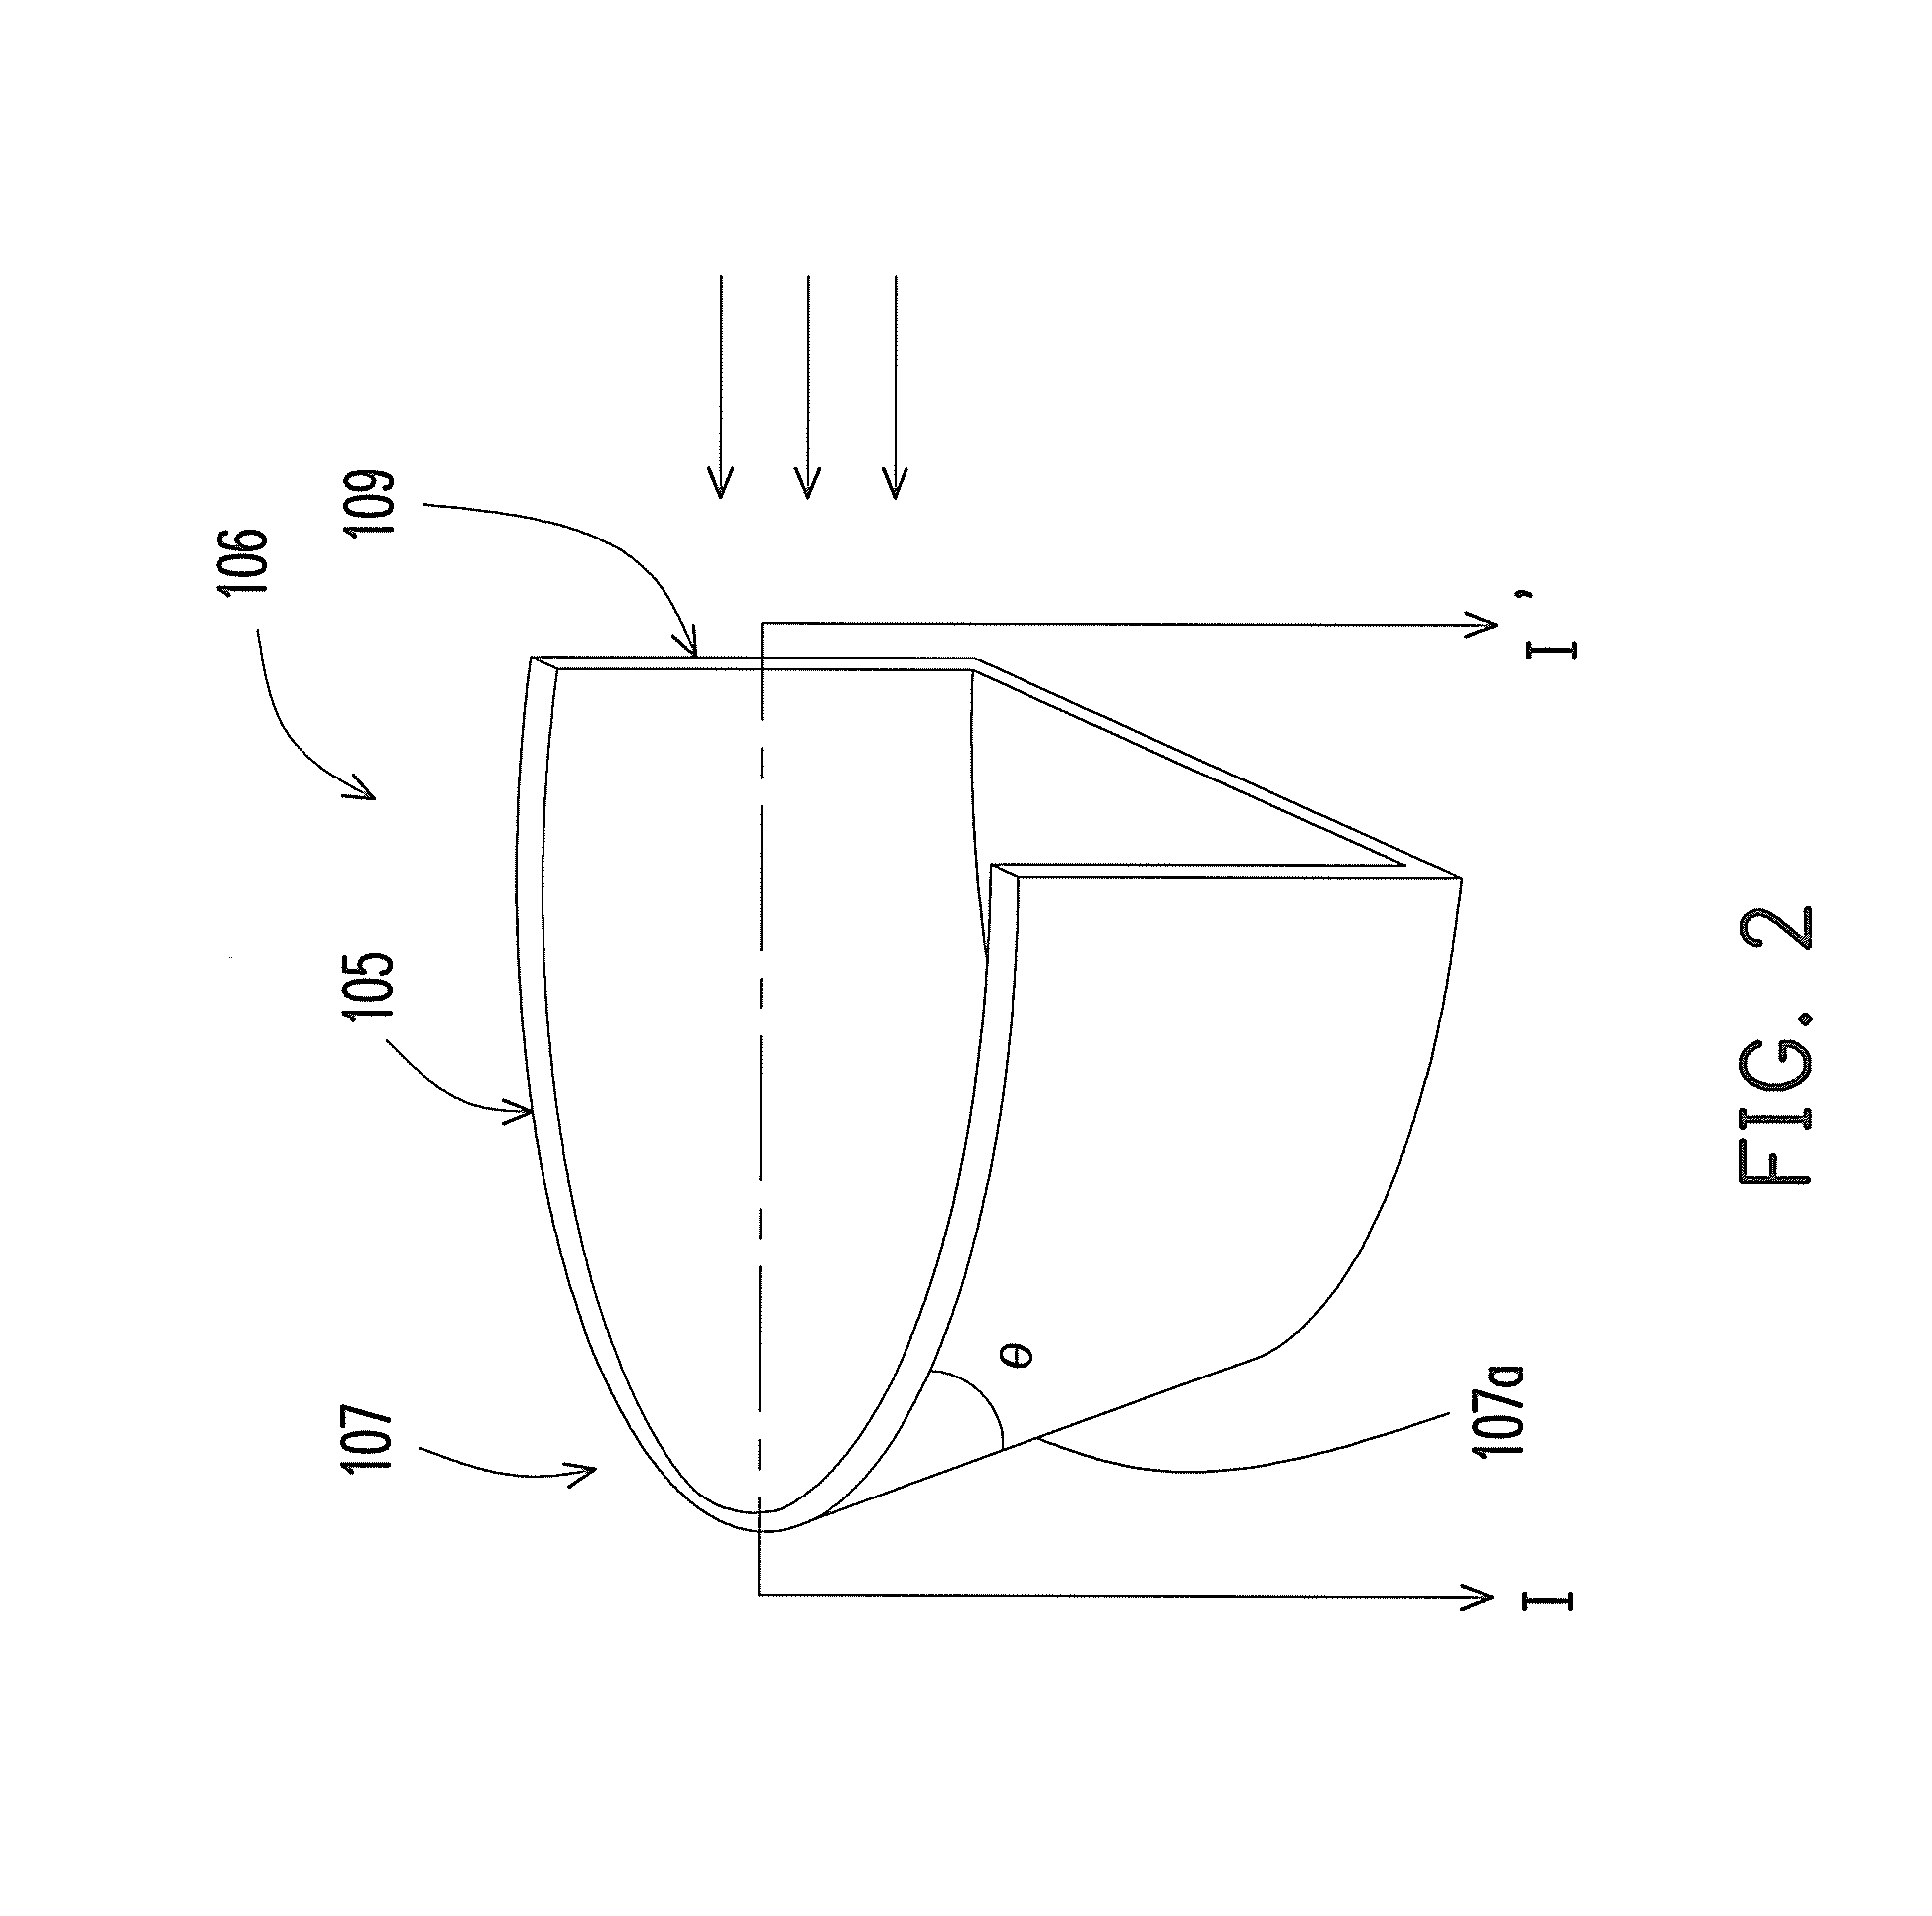 Optoelectronic device and method of forming the same